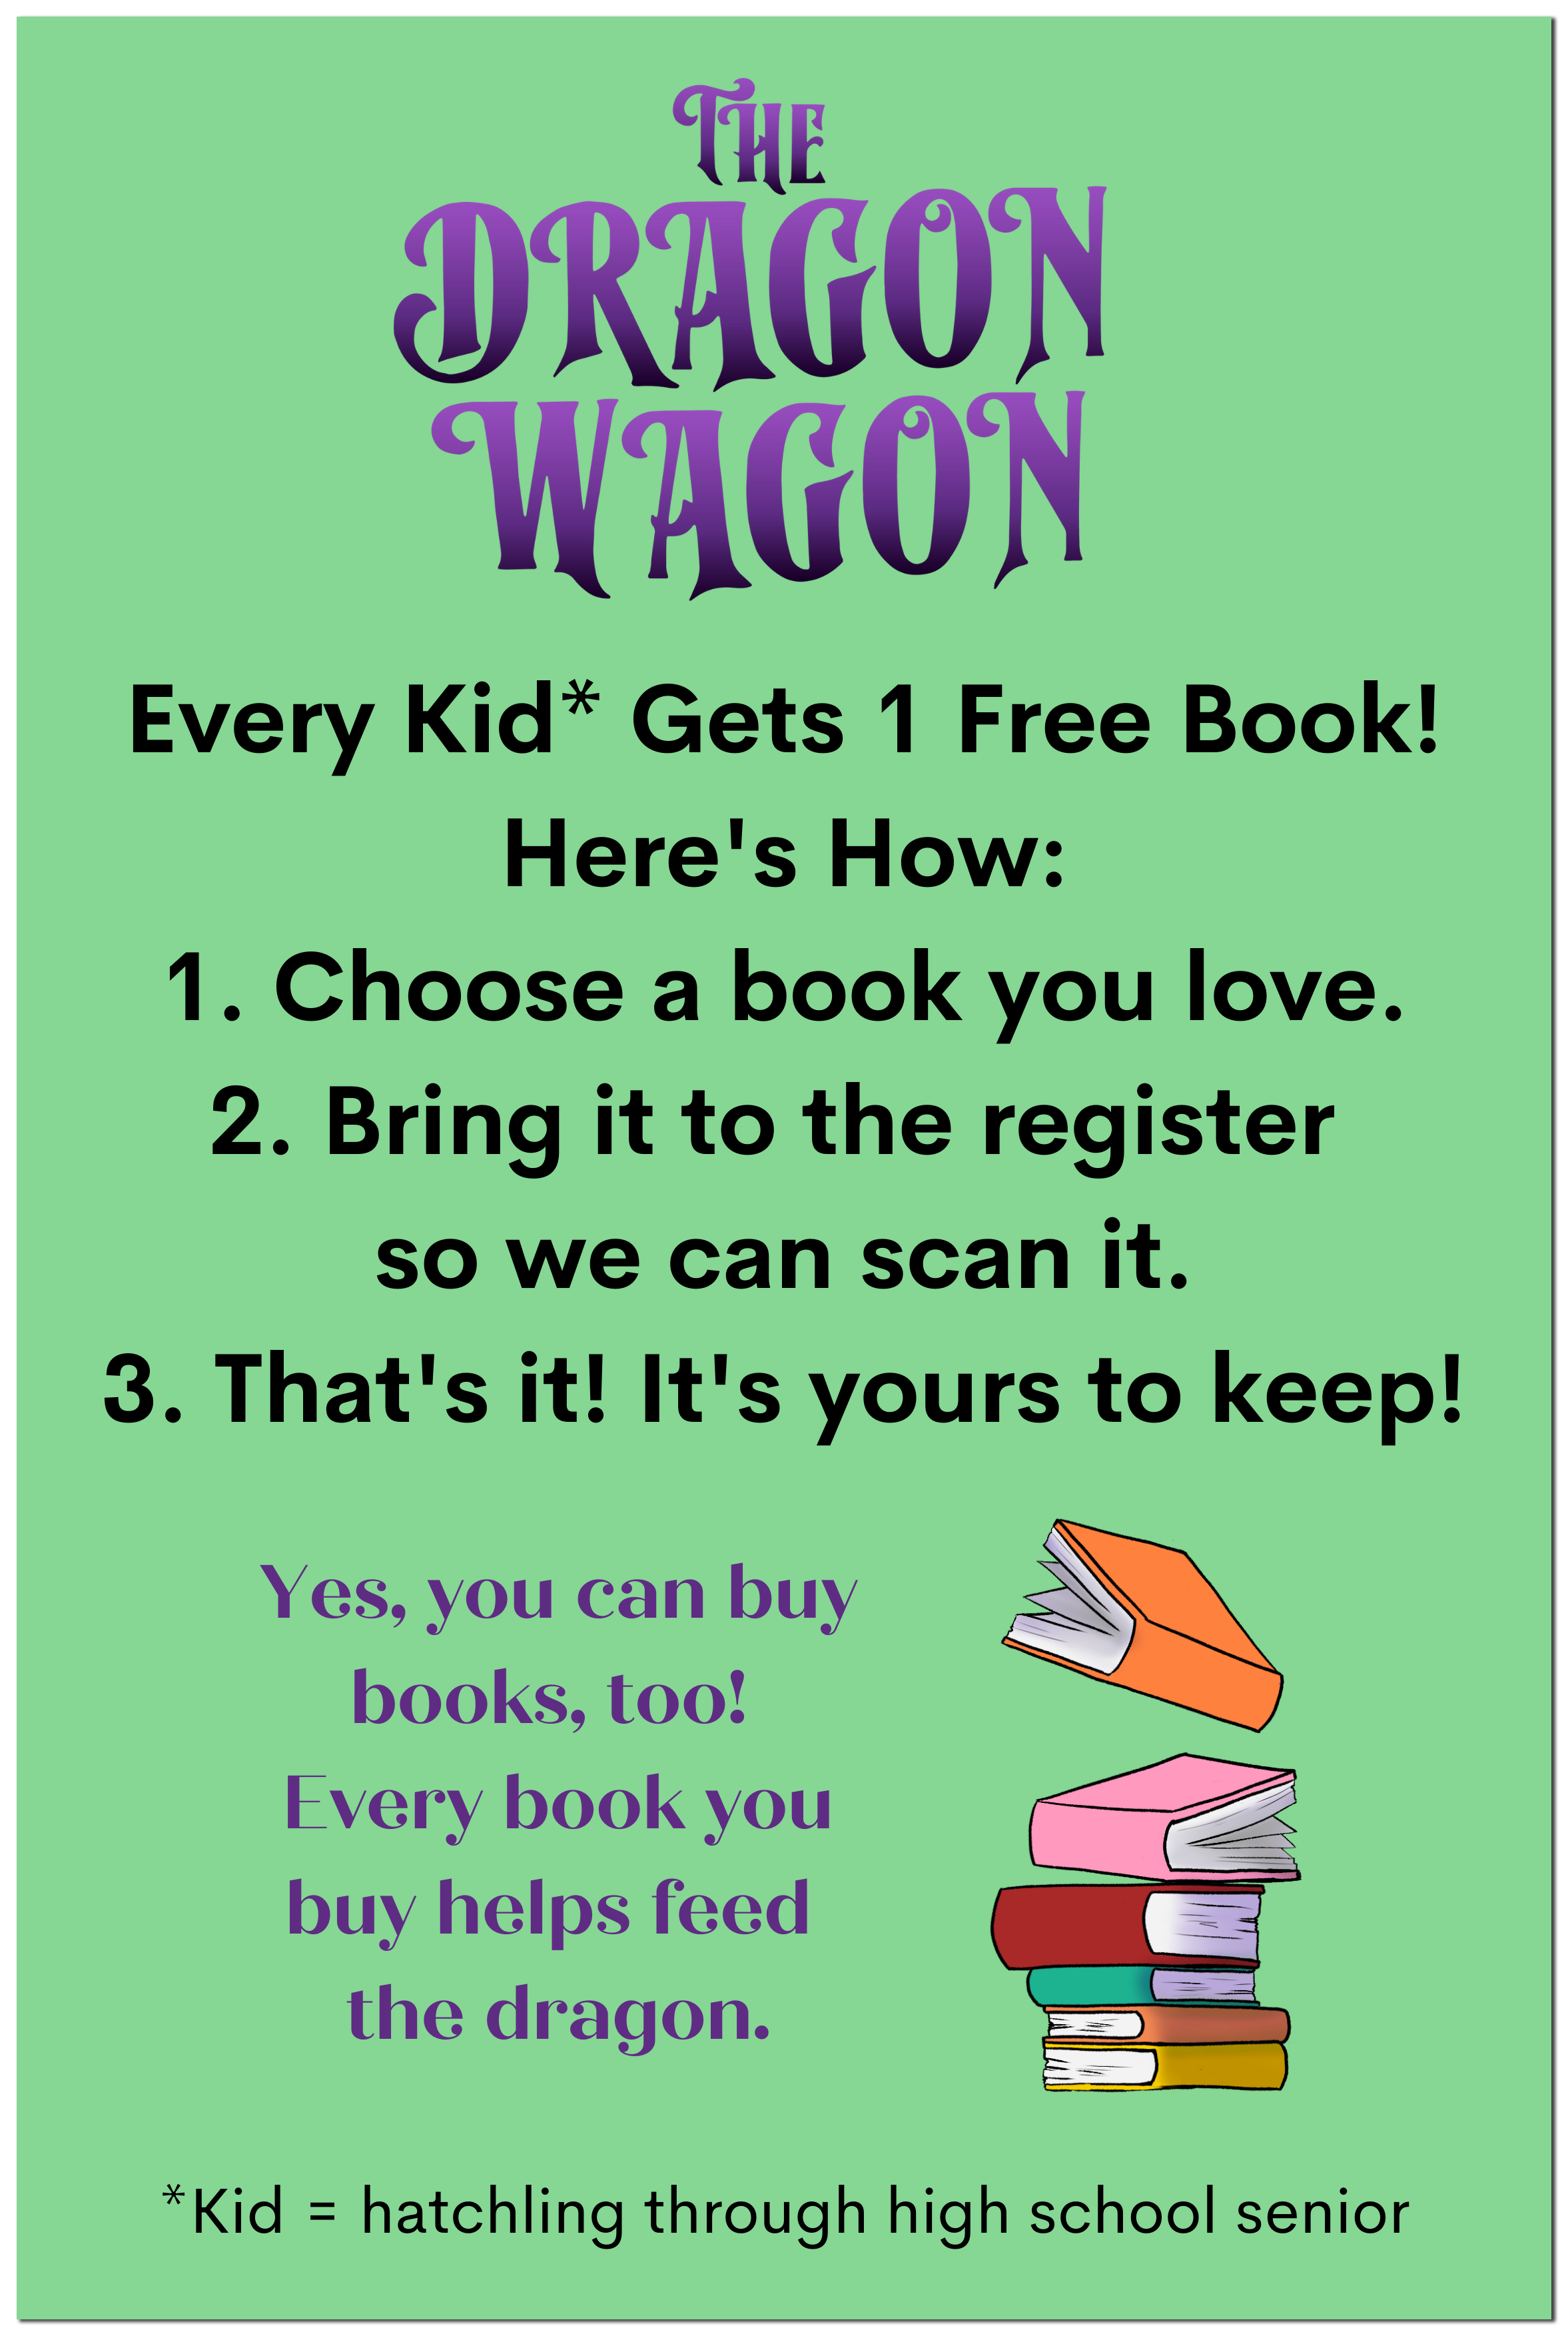 Dragon Wagon Every Kid* Gets 1 Free Book! Here's How: 1. Choose a book you love. 2. Bring it to the register so we can scan it. 3. That's it! It's yours to keep! Yes, you can buy books, too! Every book you buy helps feed the dragon. *Kid = hatchling through high school senior